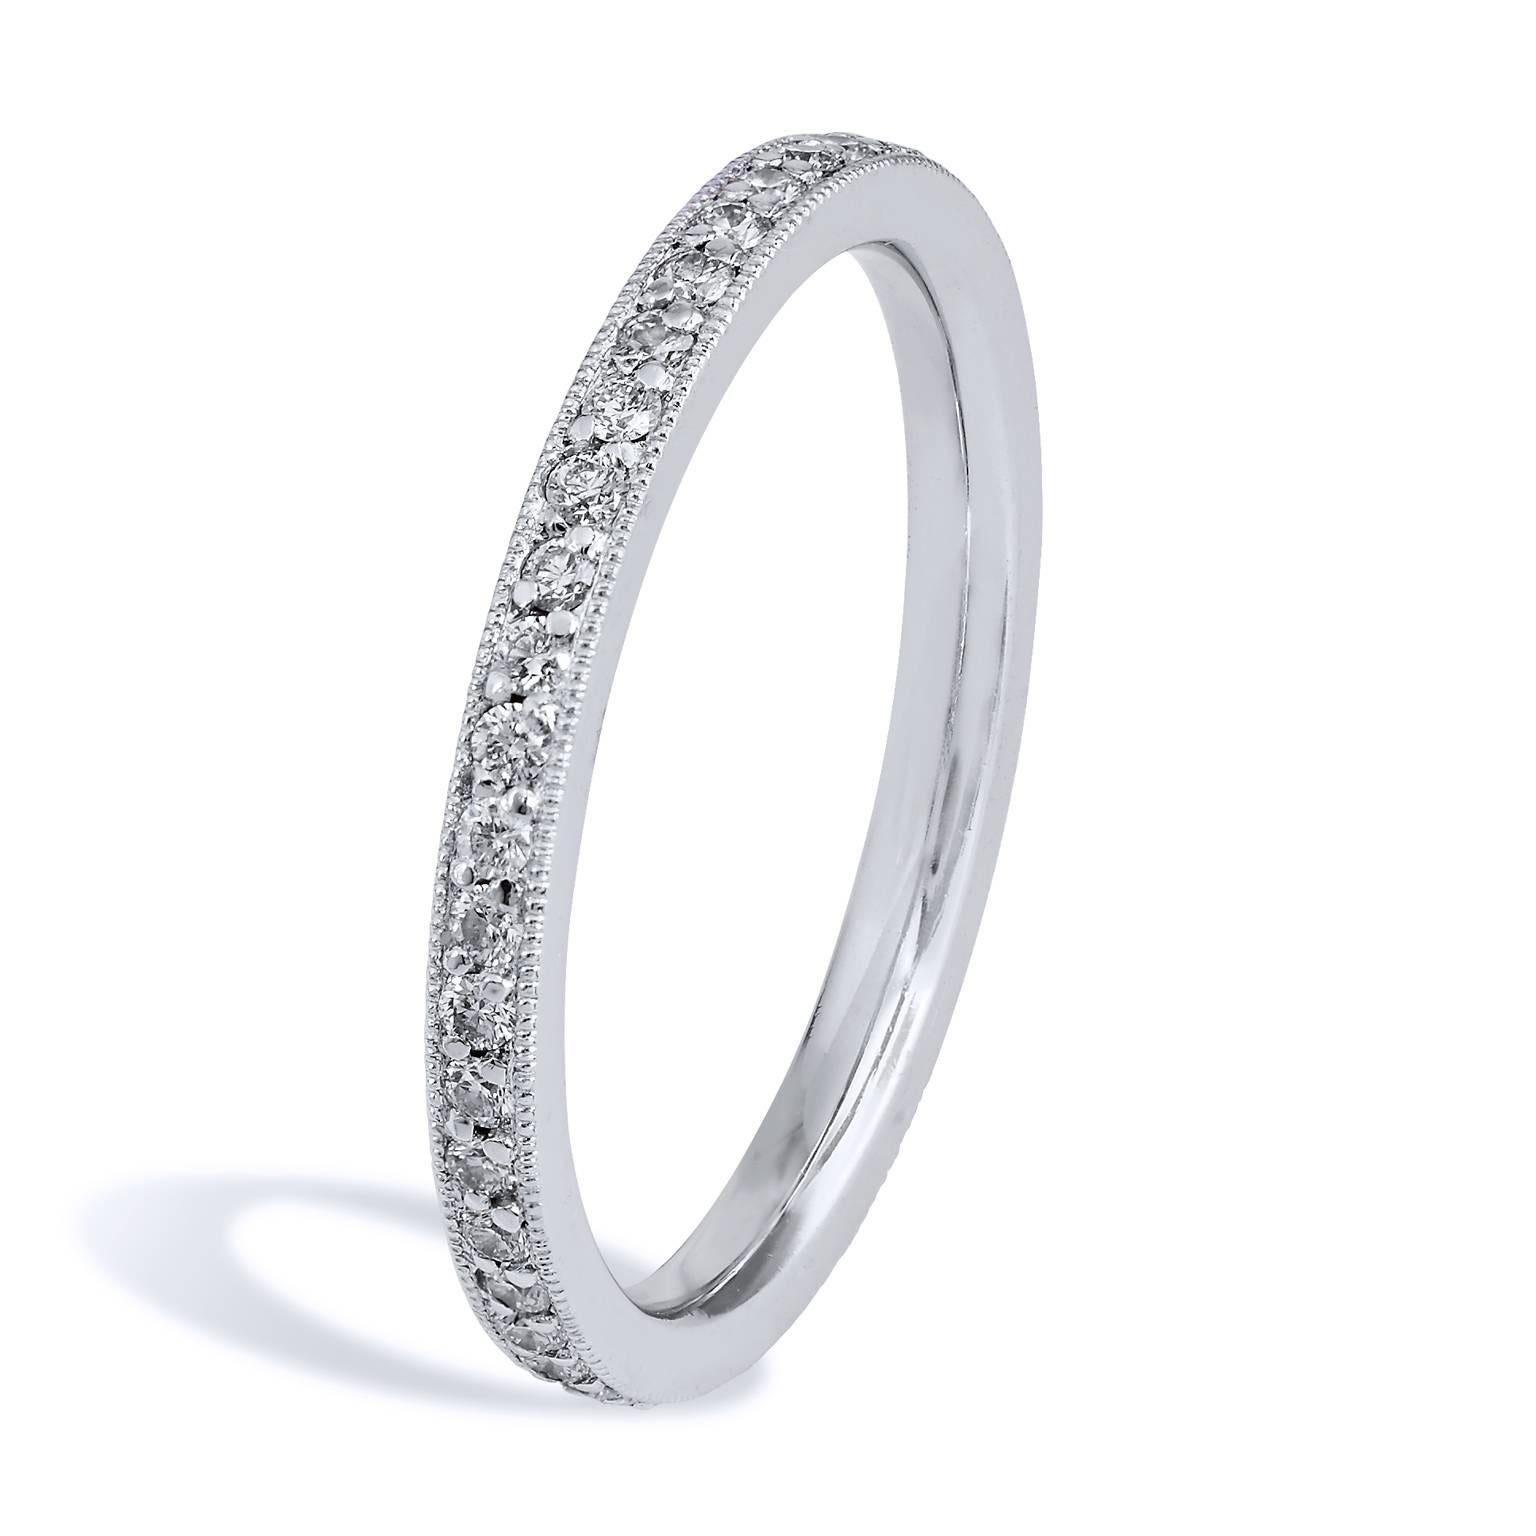 This band ring features 0.36 carat of round diamonds (G/H/VS) pave set. Affixed to a platinum band with milgrain work, this 1.90 mm thick ring provides a mosaic of light and color that twinkles with remarkable beauty.